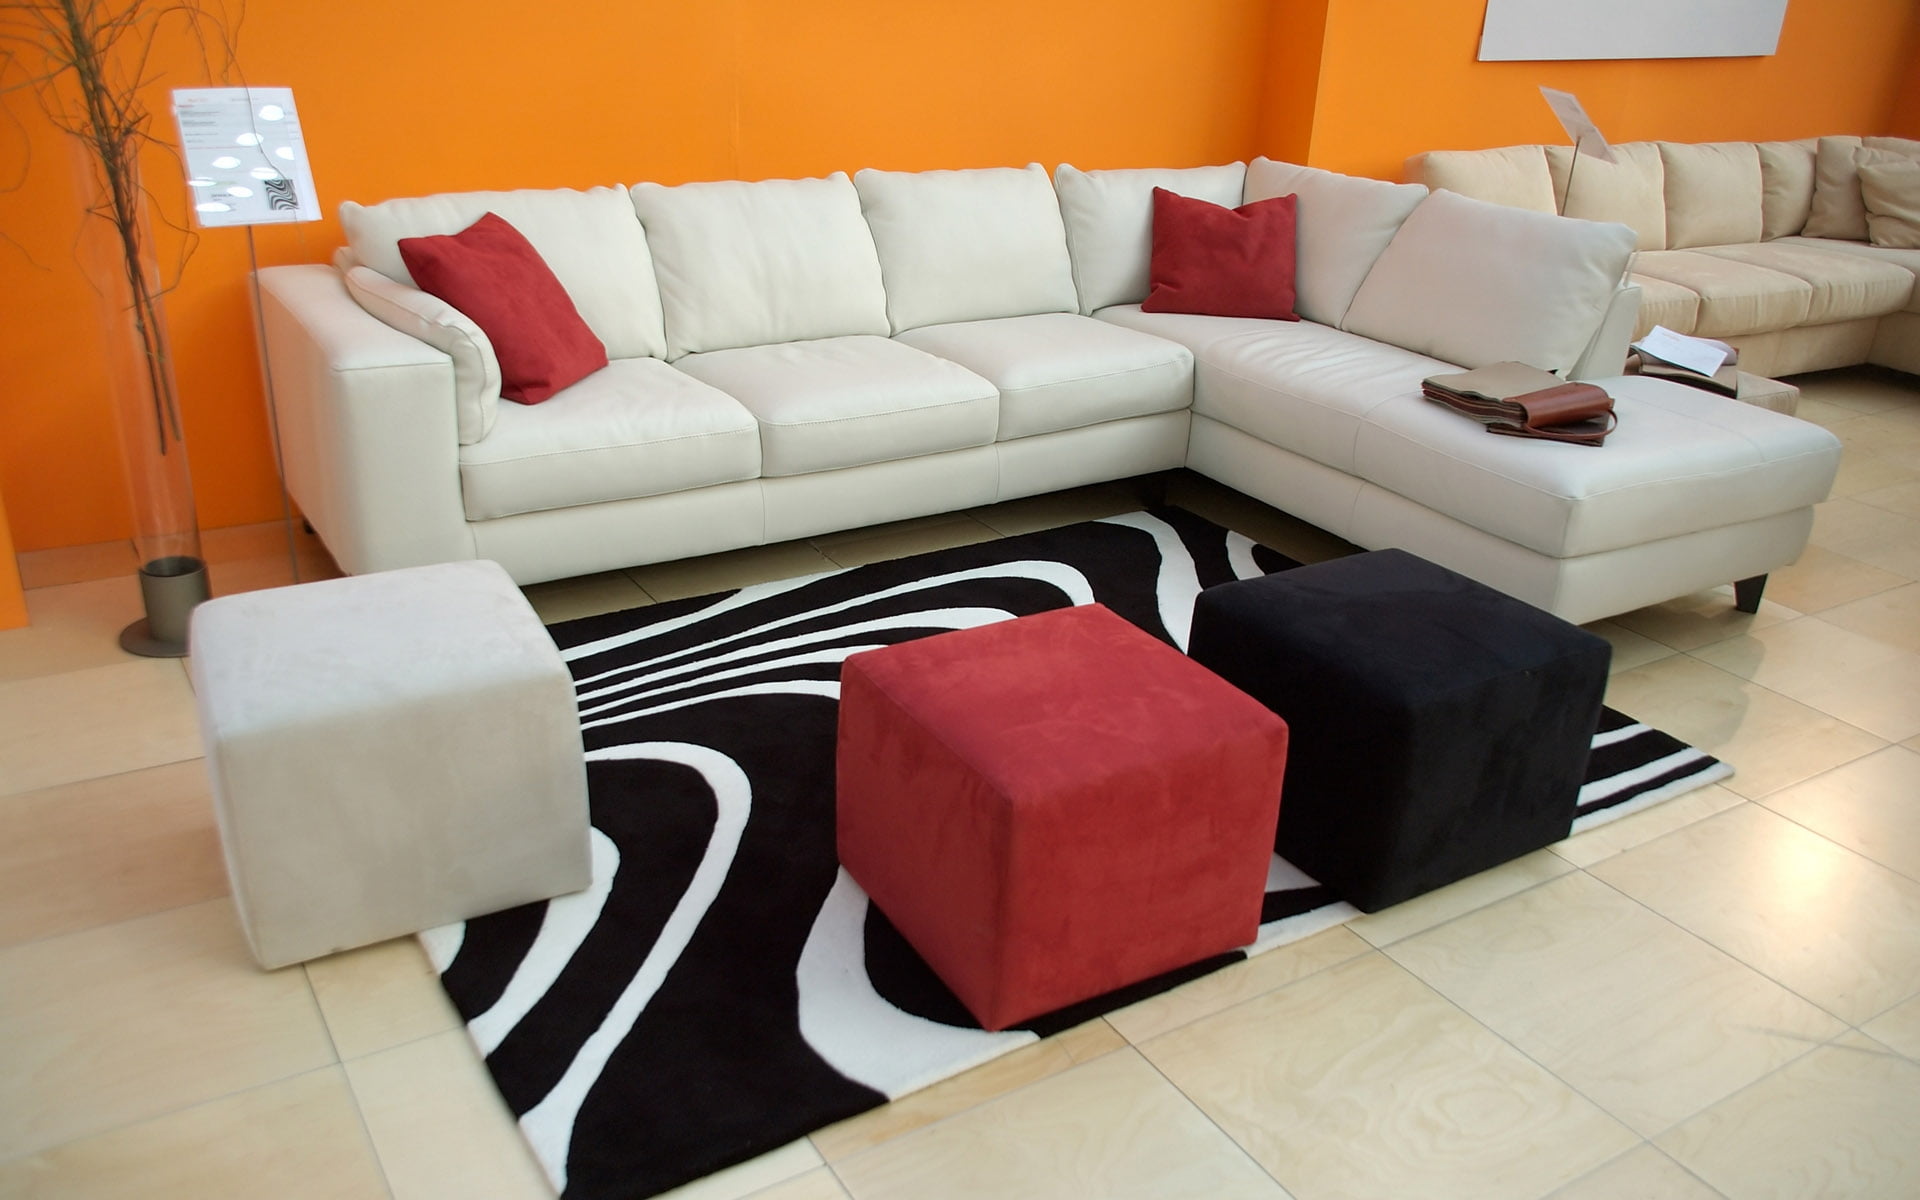 White Leather Sectional Sofa Filled, Accent Pillows For White Leather Sofa